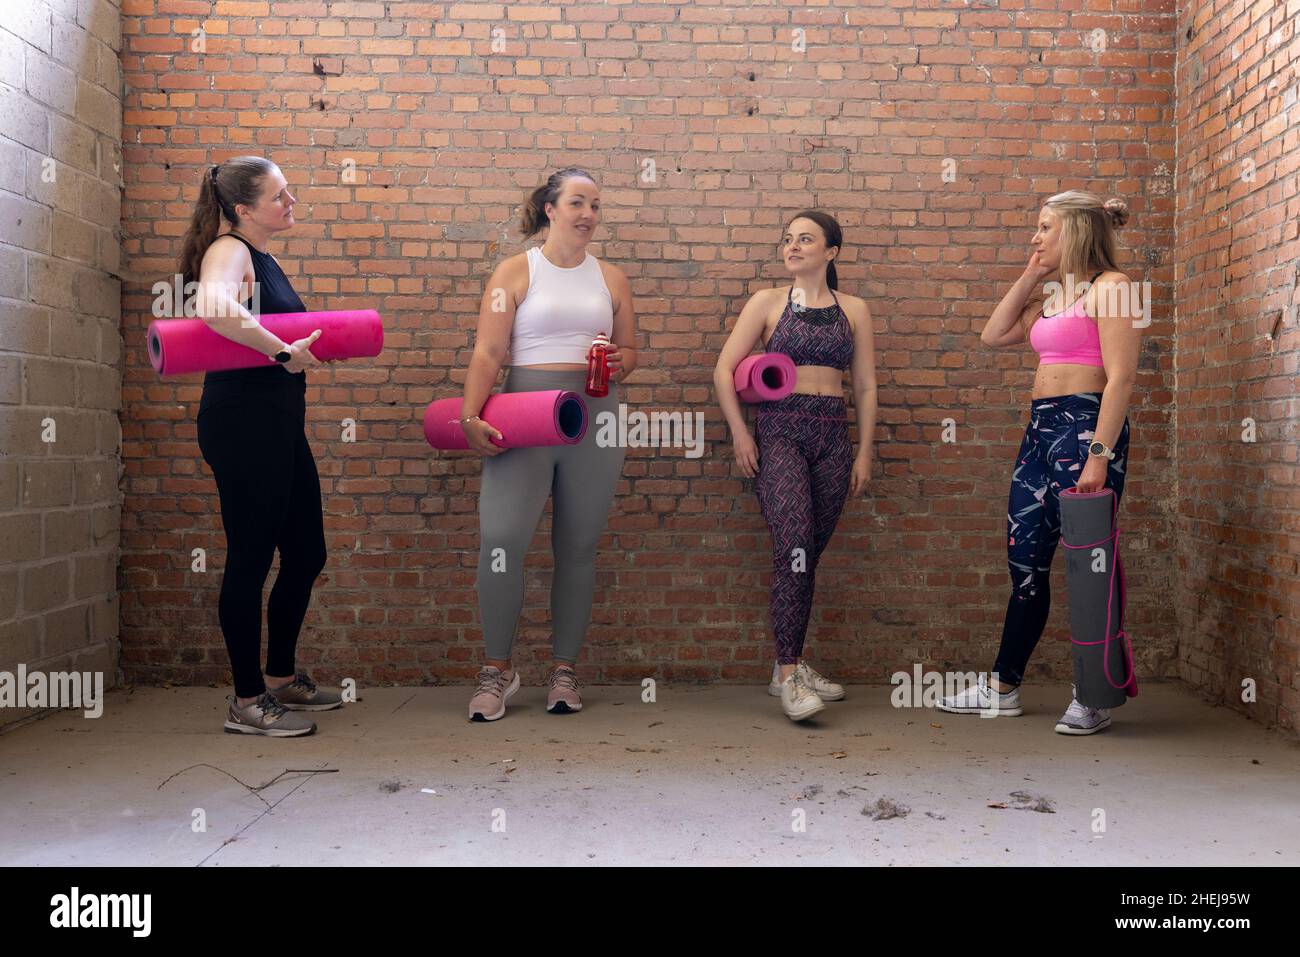 Group of young attractive sporty women of different body shapes gathered together and talking while waiting in the gym. Industrial brick wall background. High quality photo Stock Photo